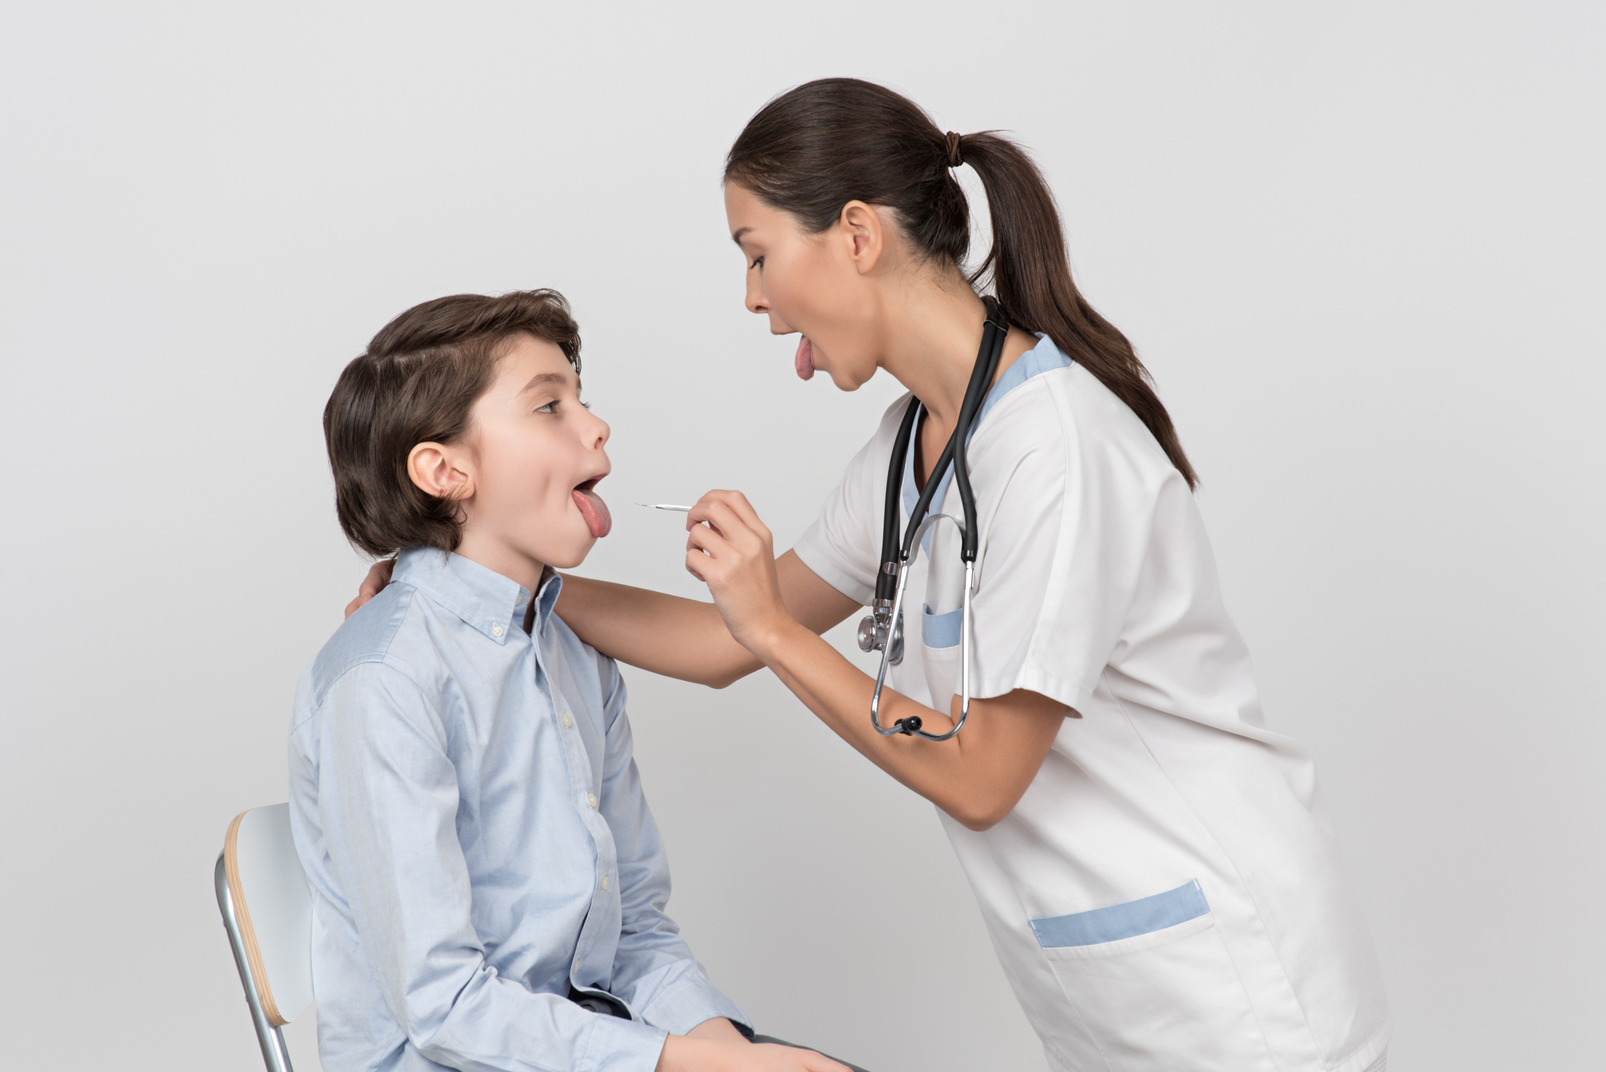 Female doctor showing her tongue out and examining her patient's mouth